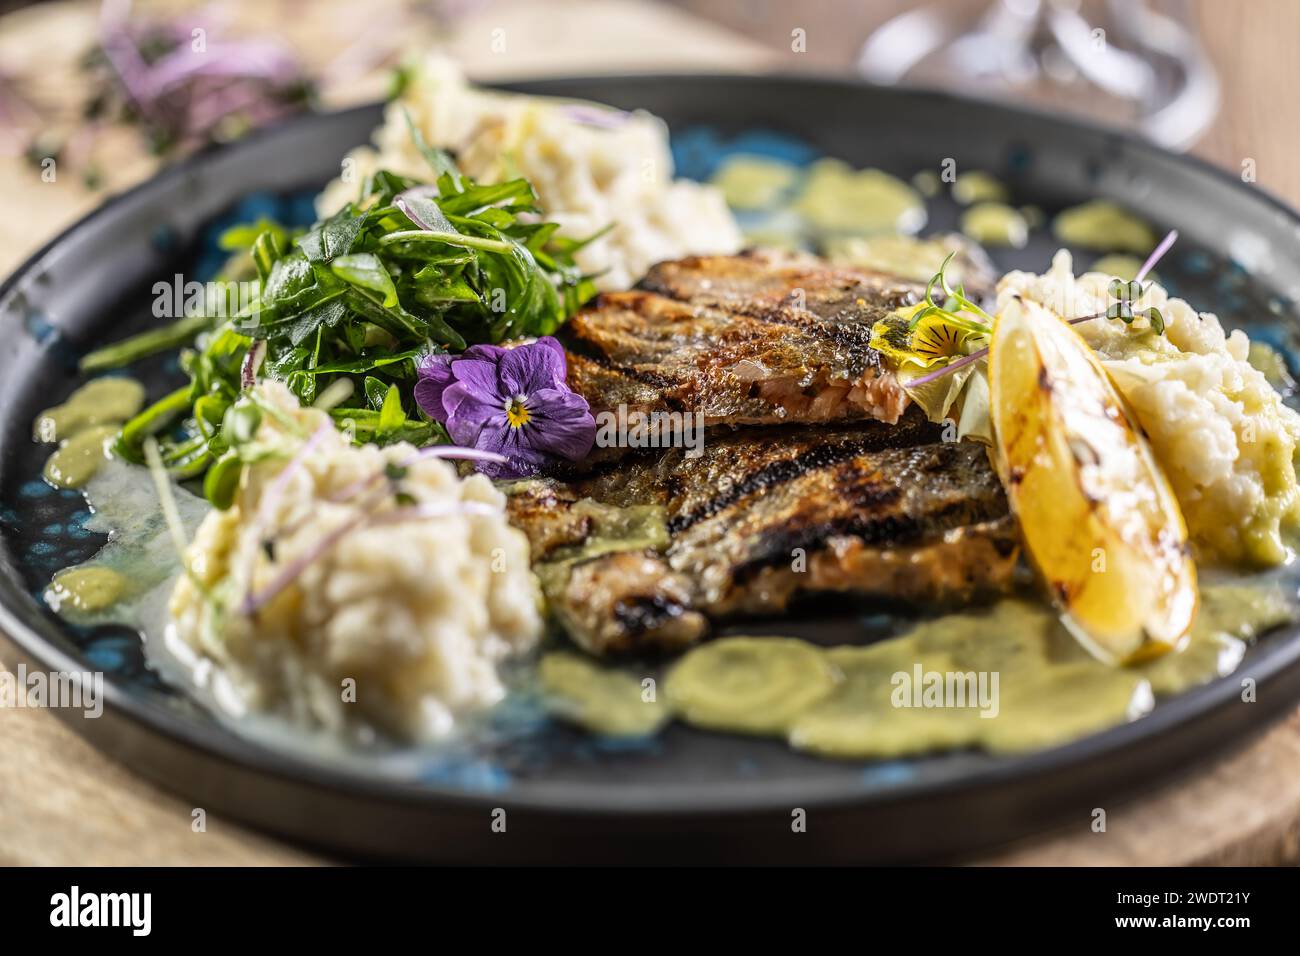 Grilled trout fillet with mashed potatoes and lemon sauce on a restaurant plate. Stock Photo